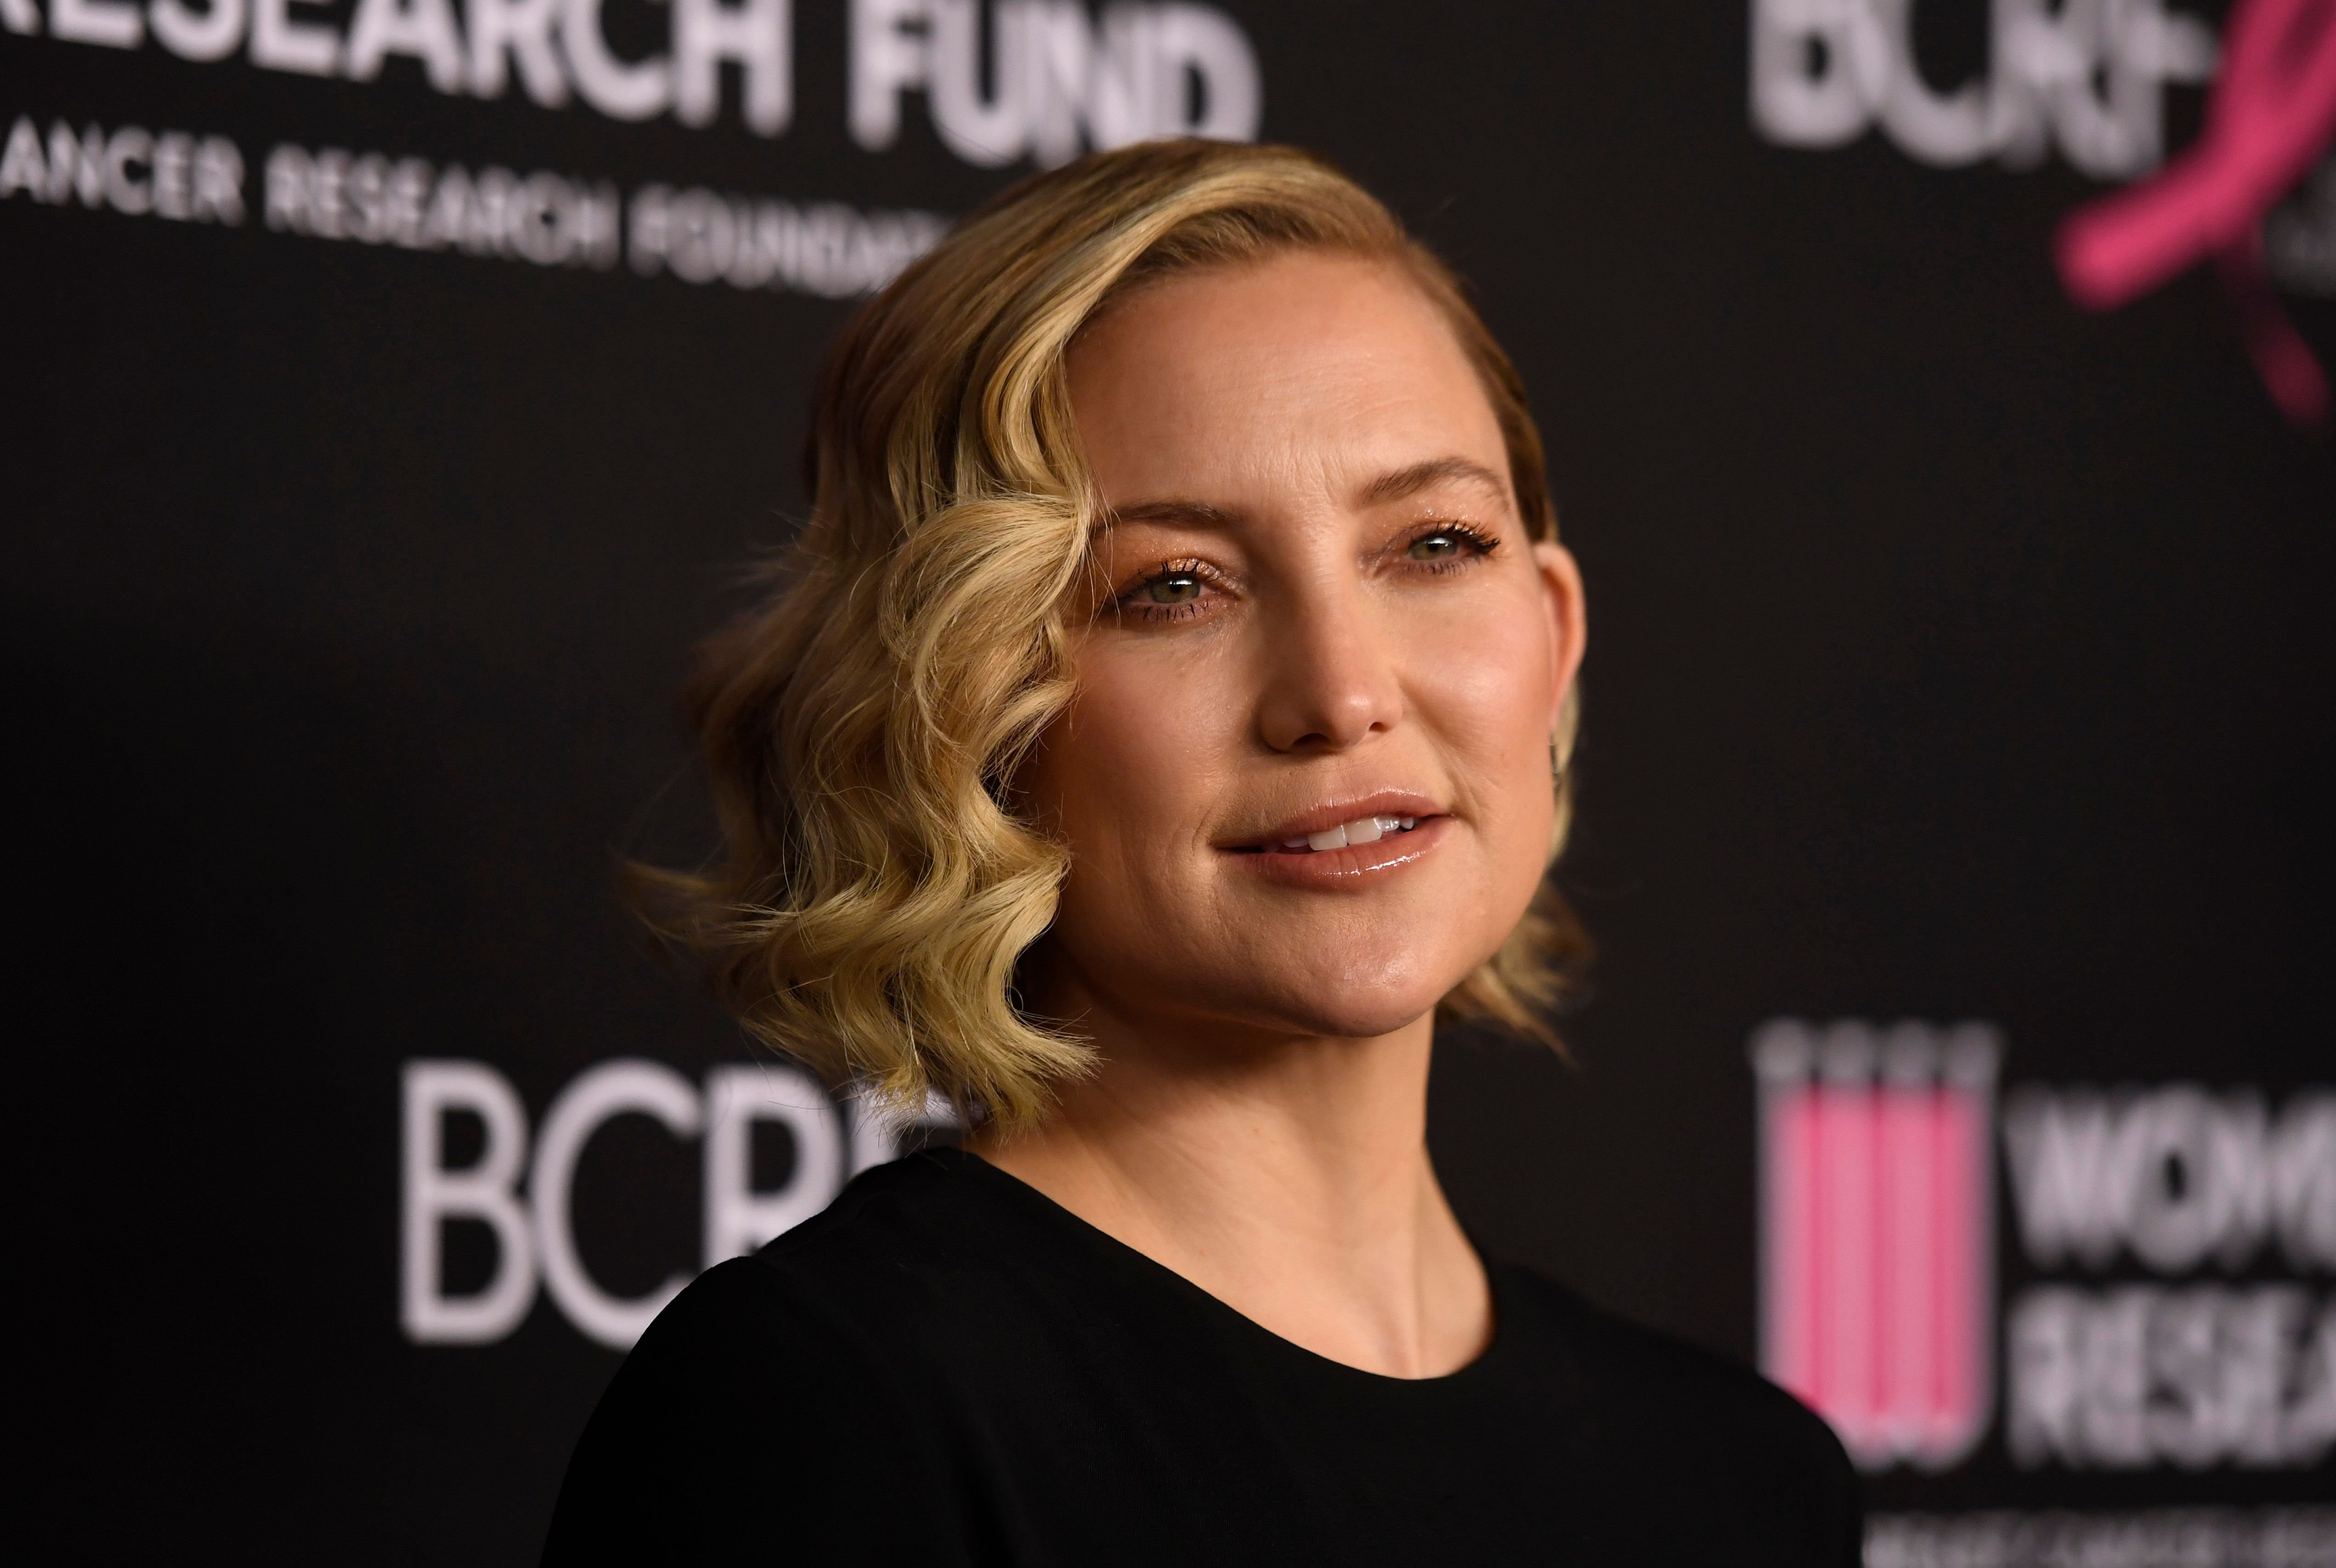 Kate Hudson at the Women's Cancer Research Fund's An Unforgettable Evening Benefit Gala at the Beverly Wilshire Four Seasons Hotel on February 28, 2019 | Photo: Getty Images